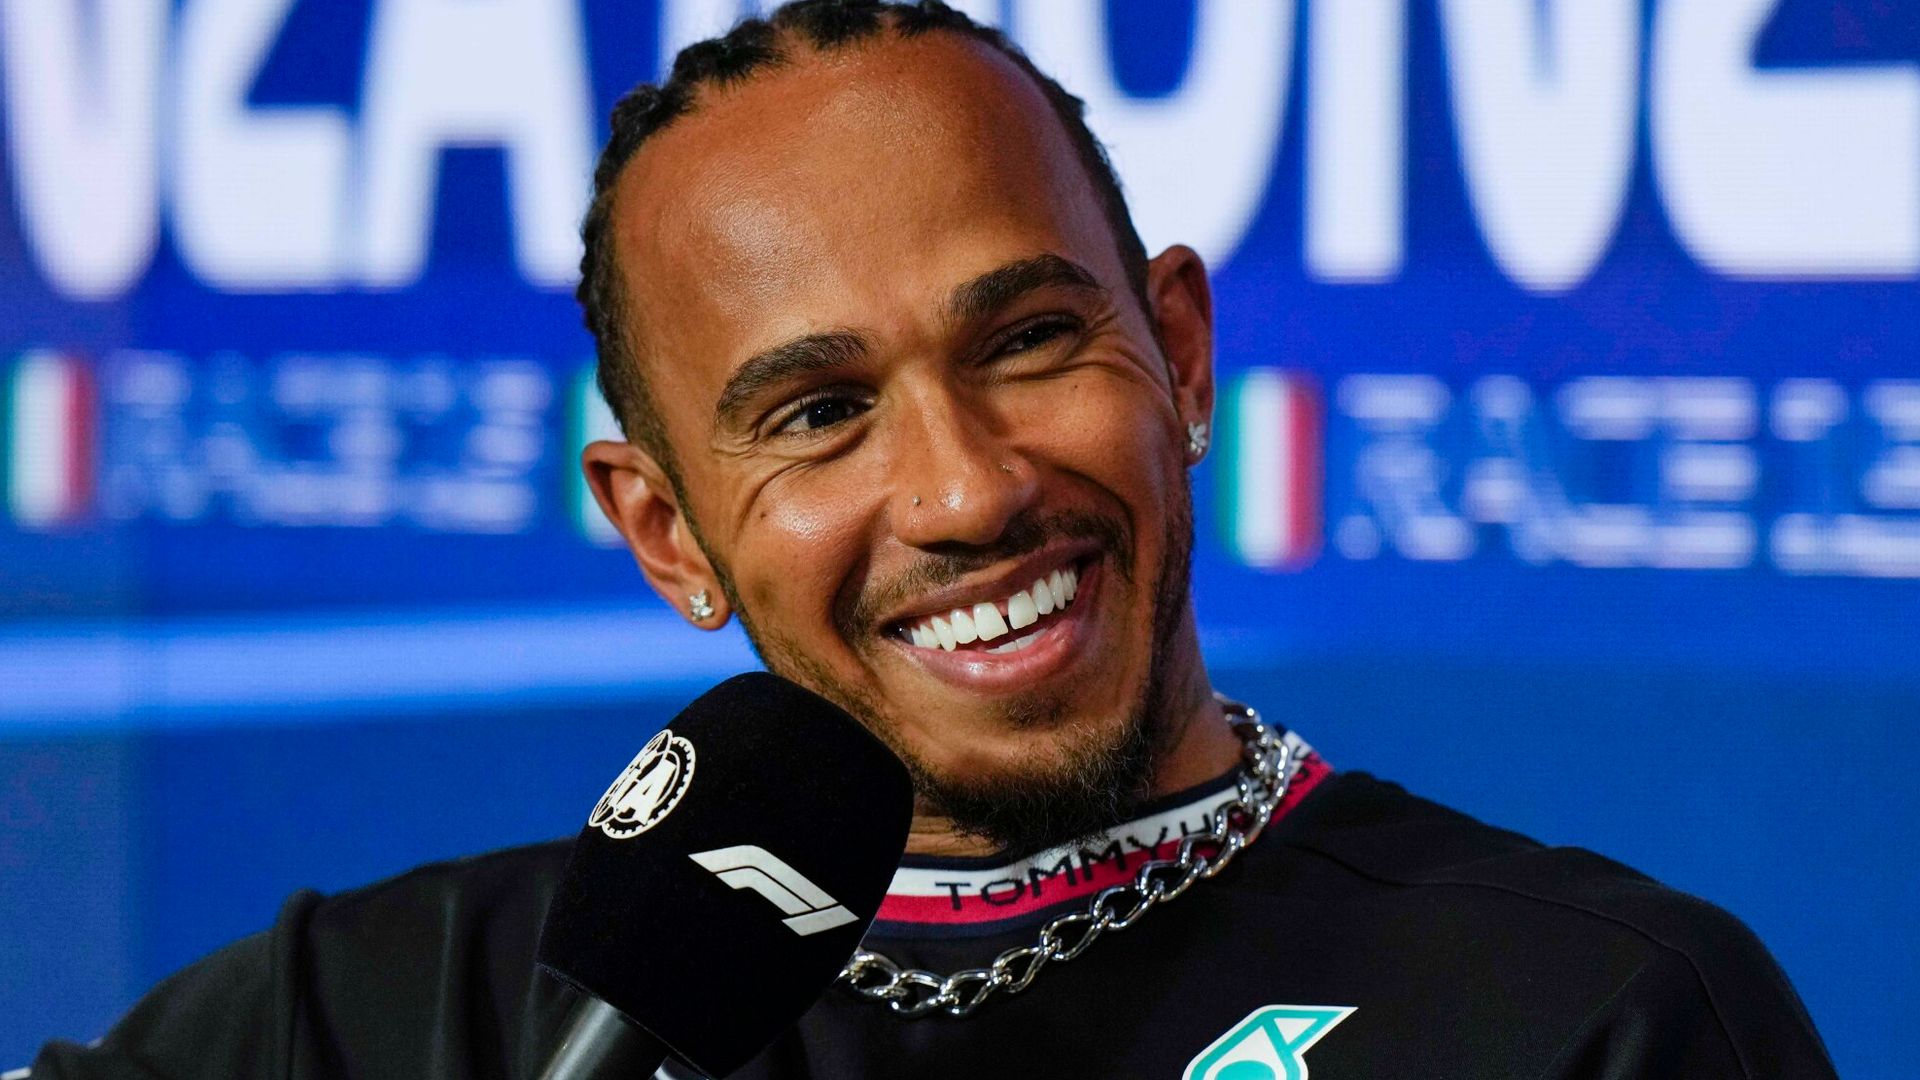 Hamilton: Staying in F1 not about 2021 'revenge'